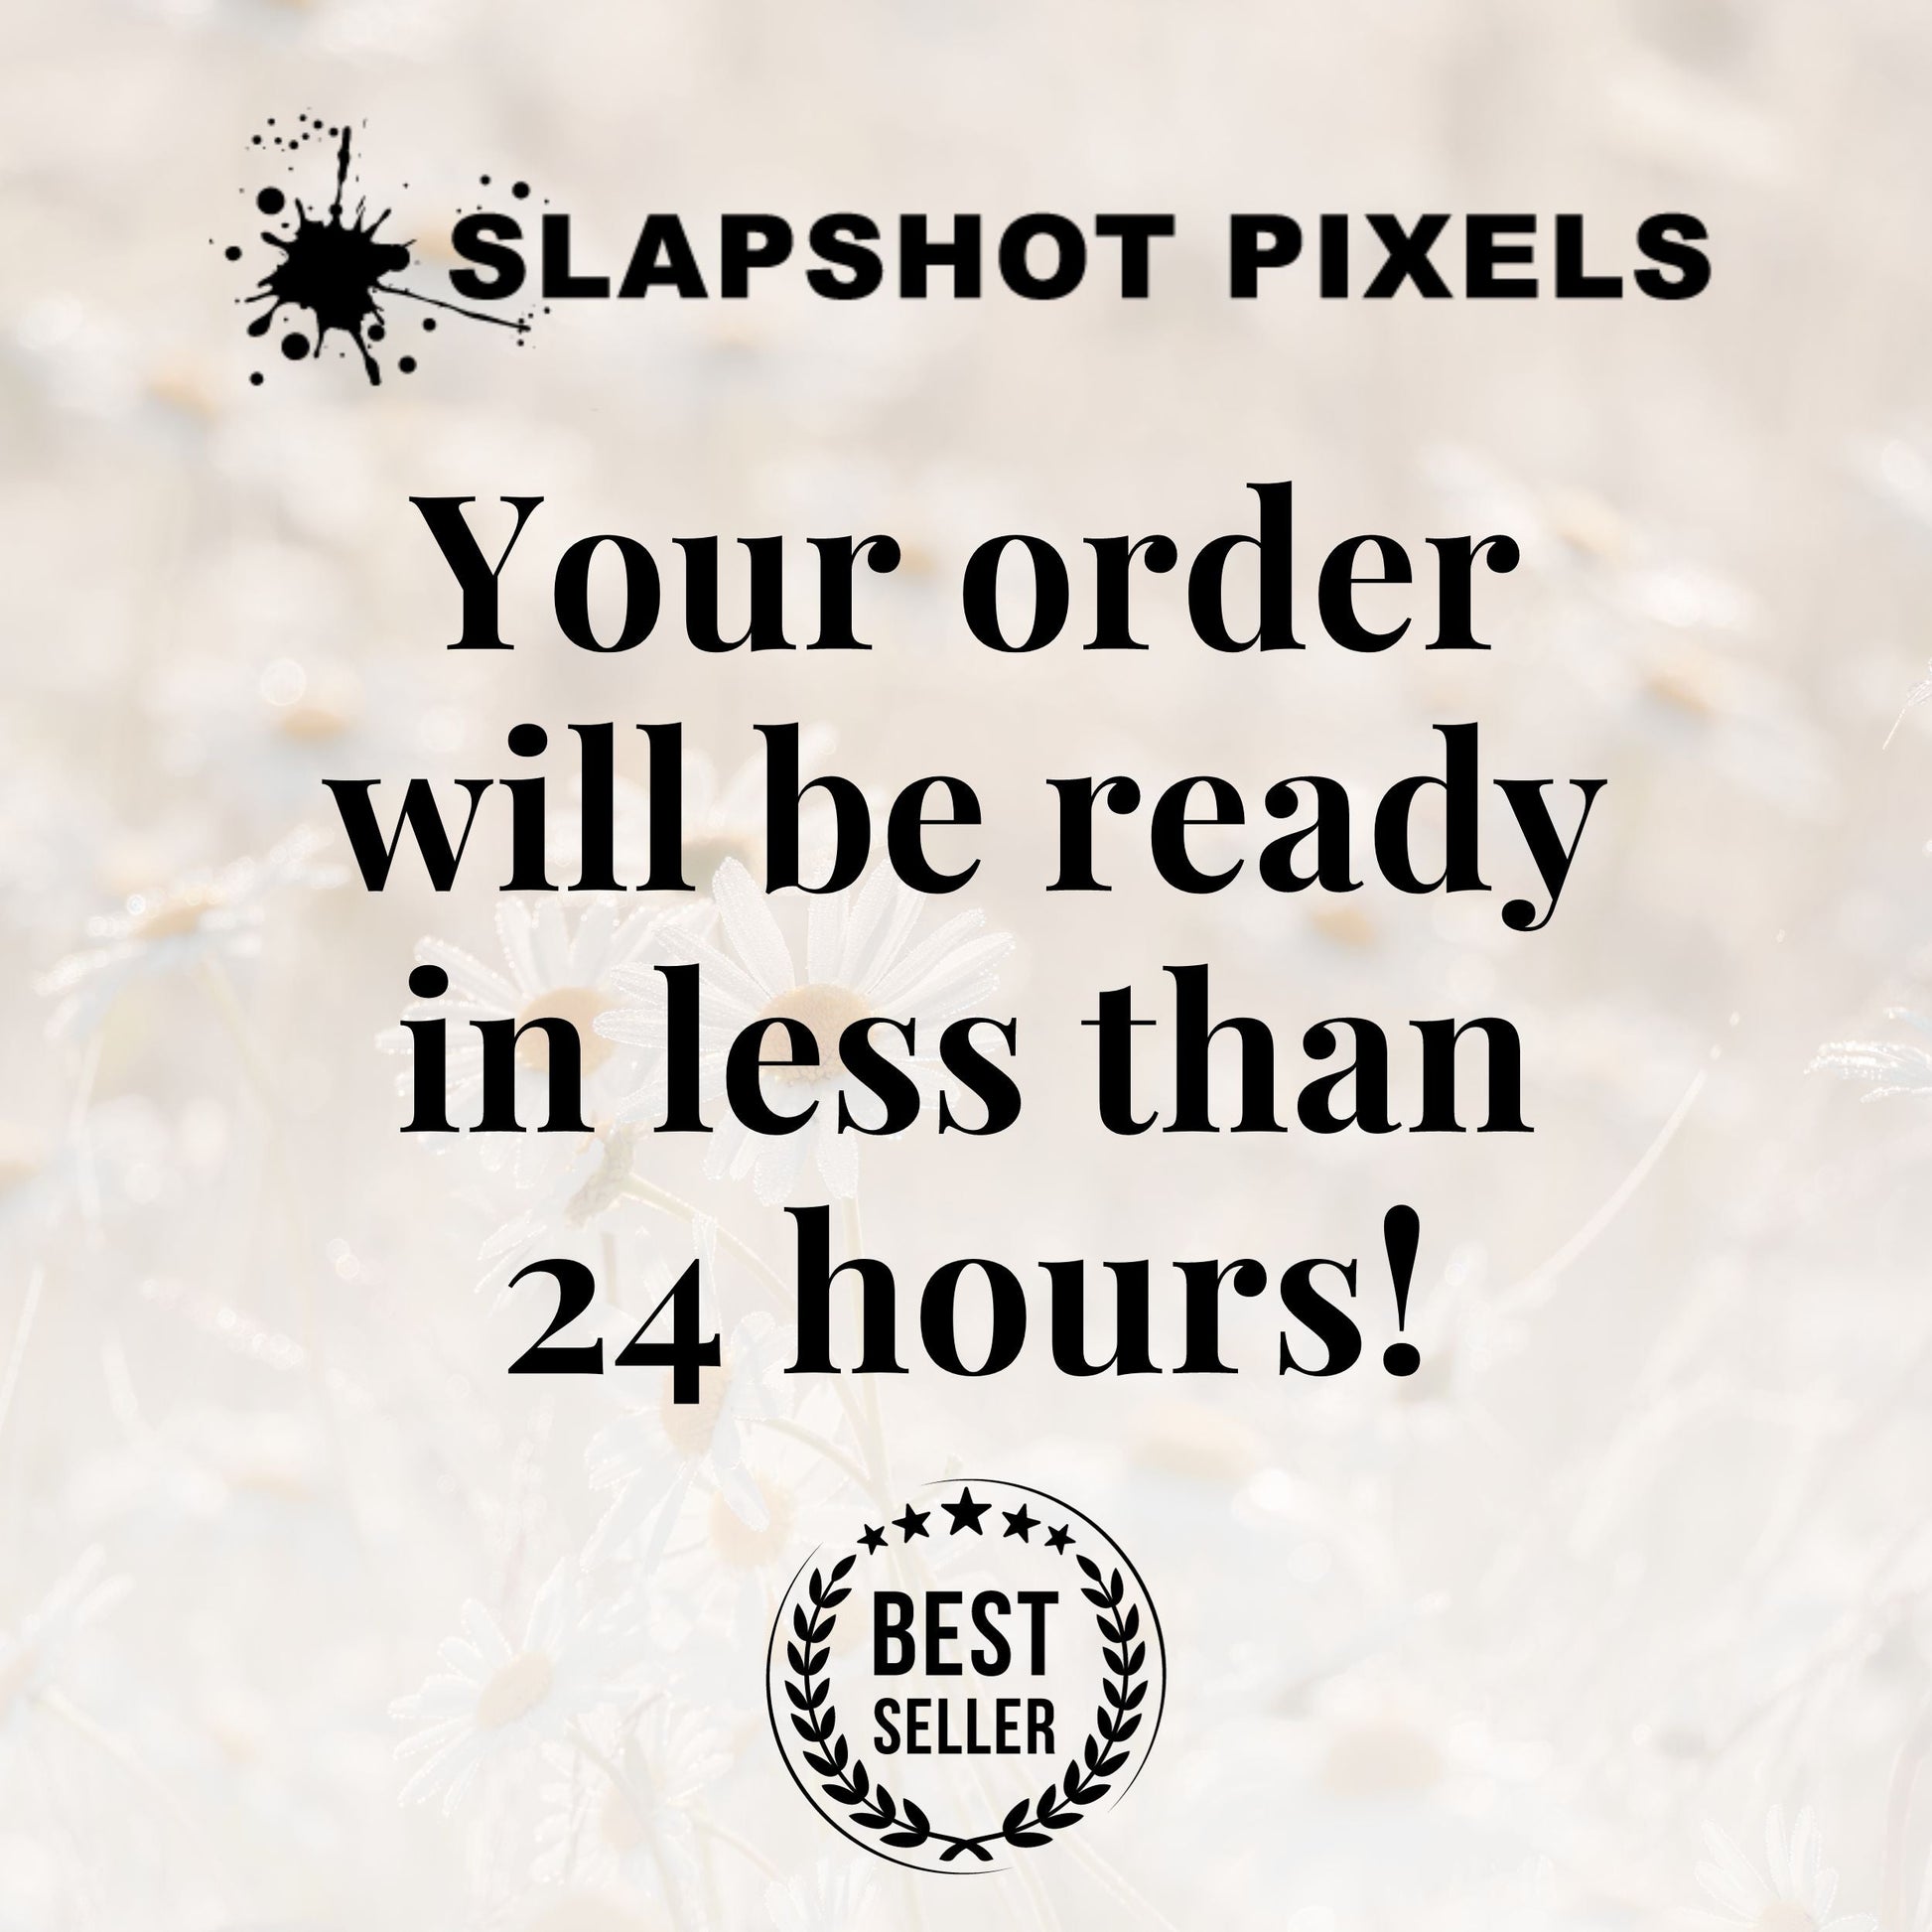 Your order will be ready in less than 24 hours.